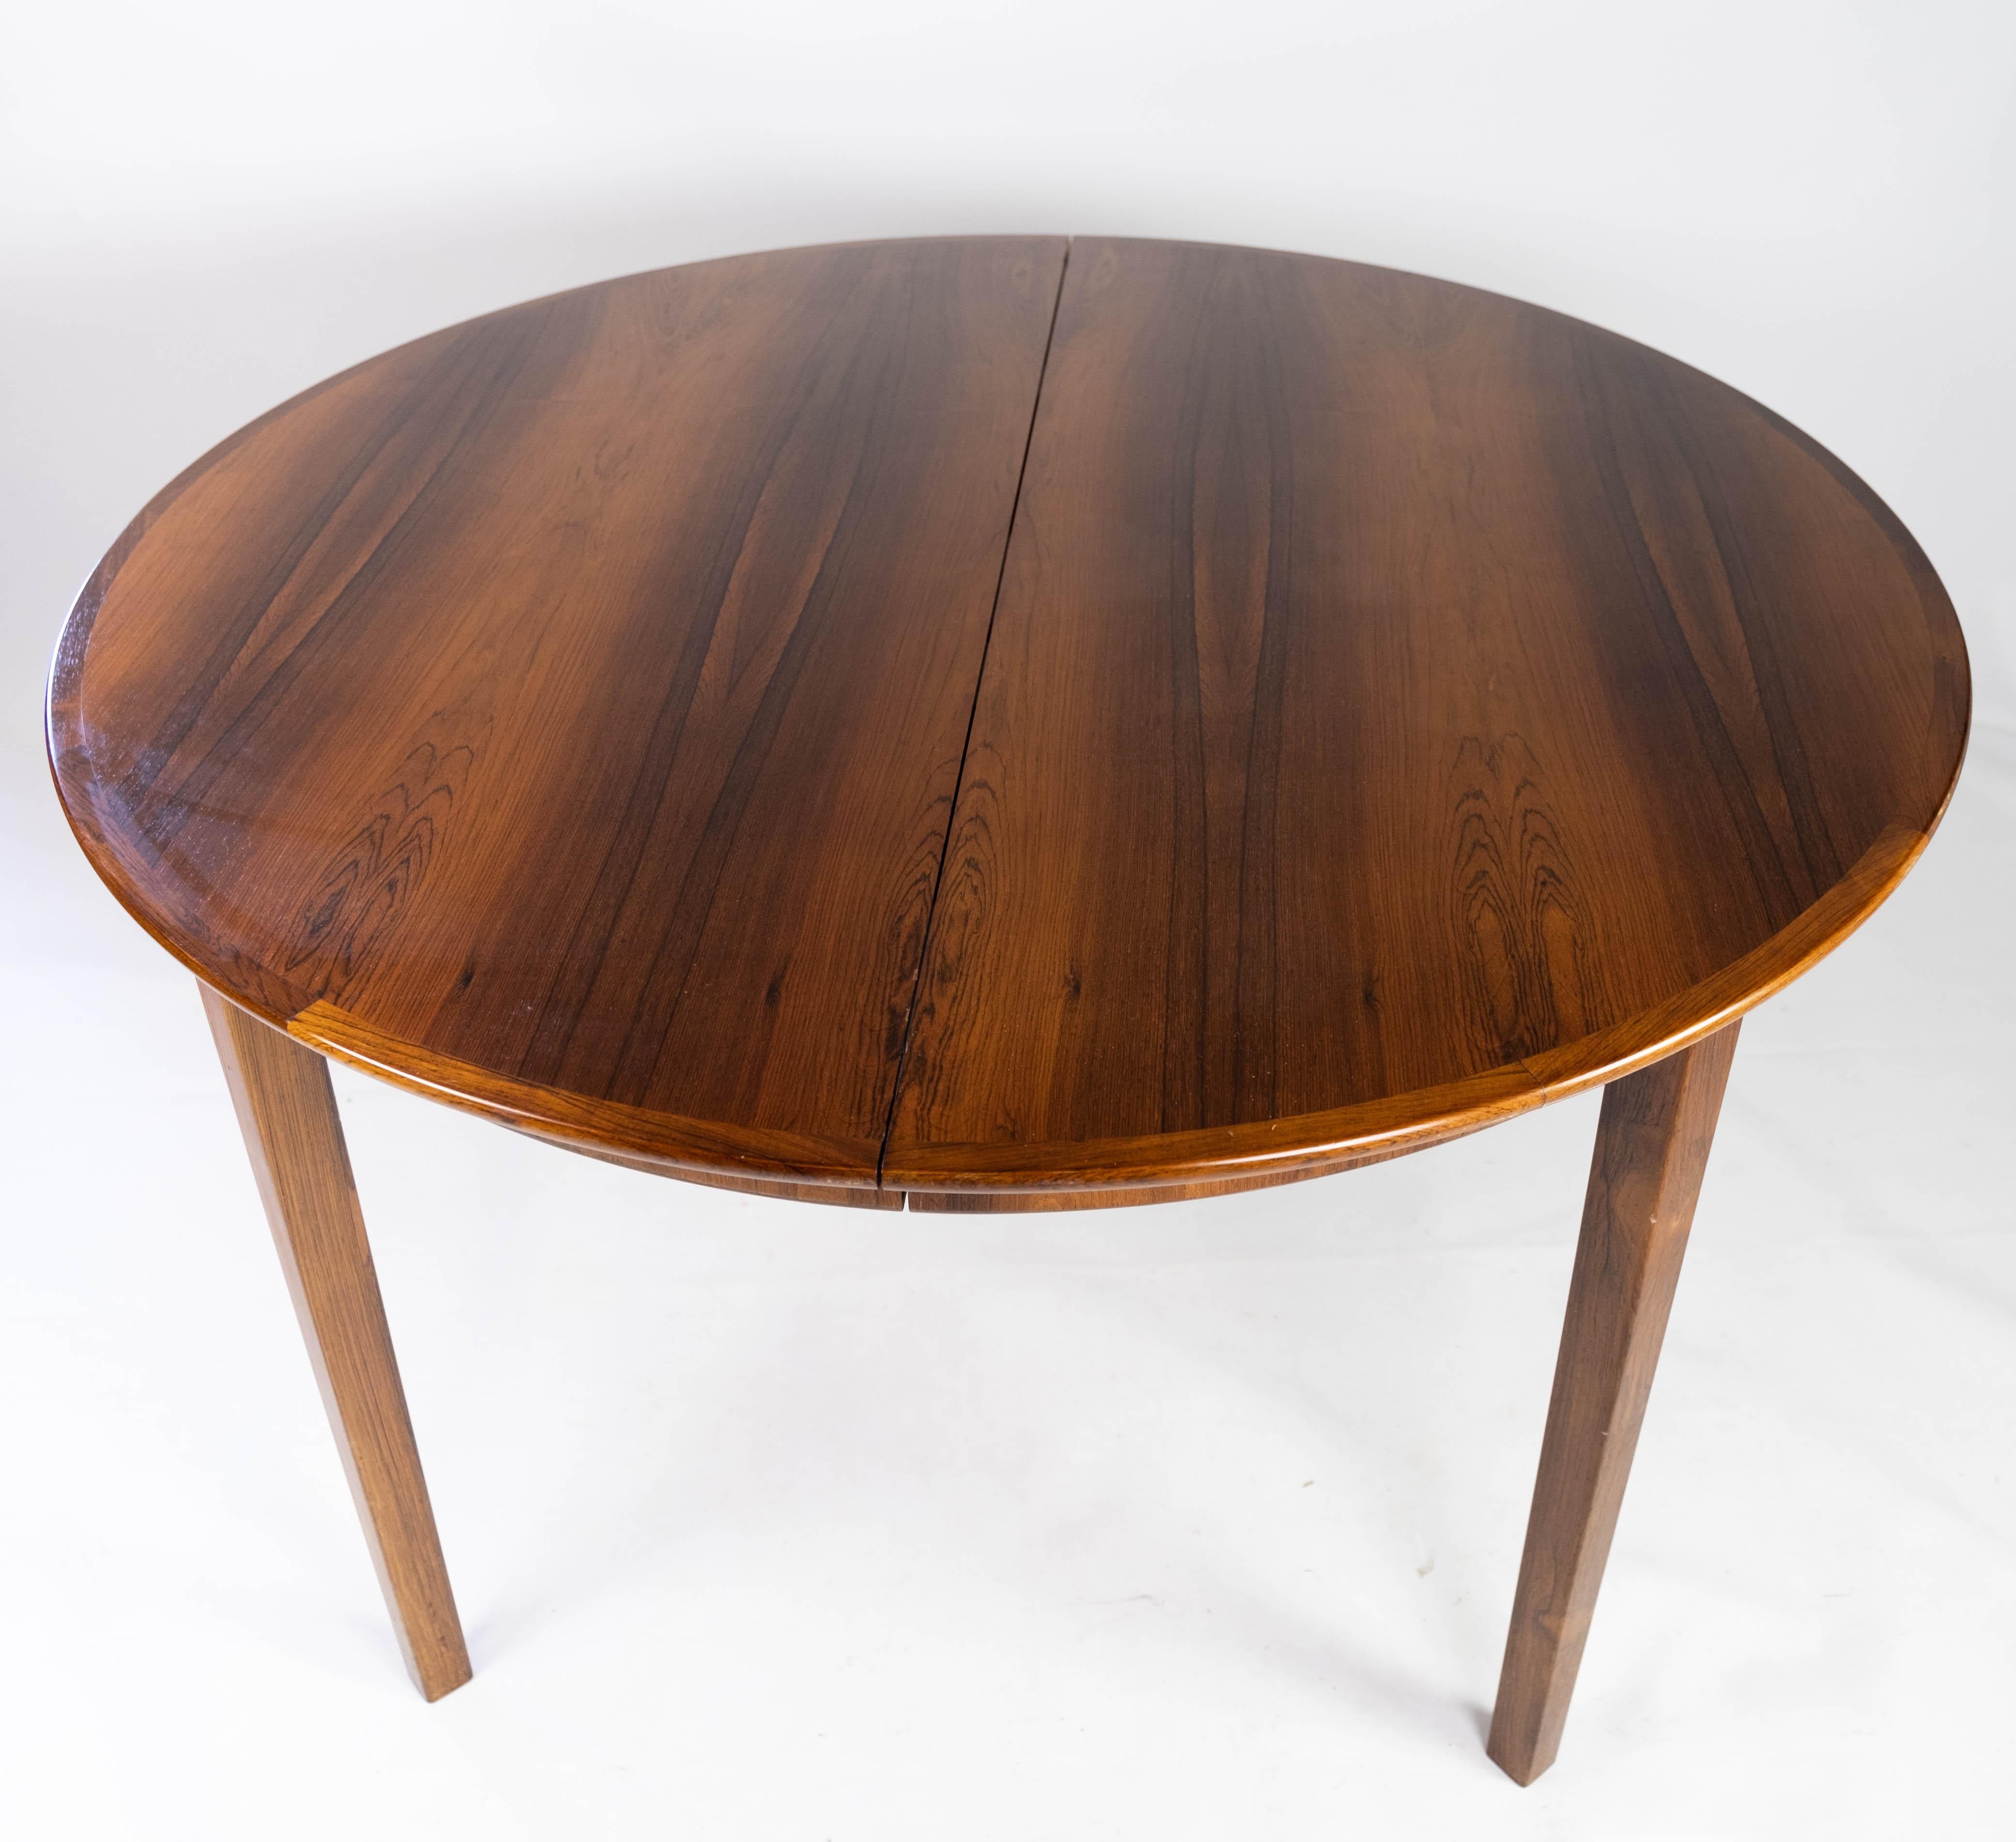 Mid-Century Modern Dining Table Made In Rosewood With Extension Plates, Danish Design From 1960s For Sale